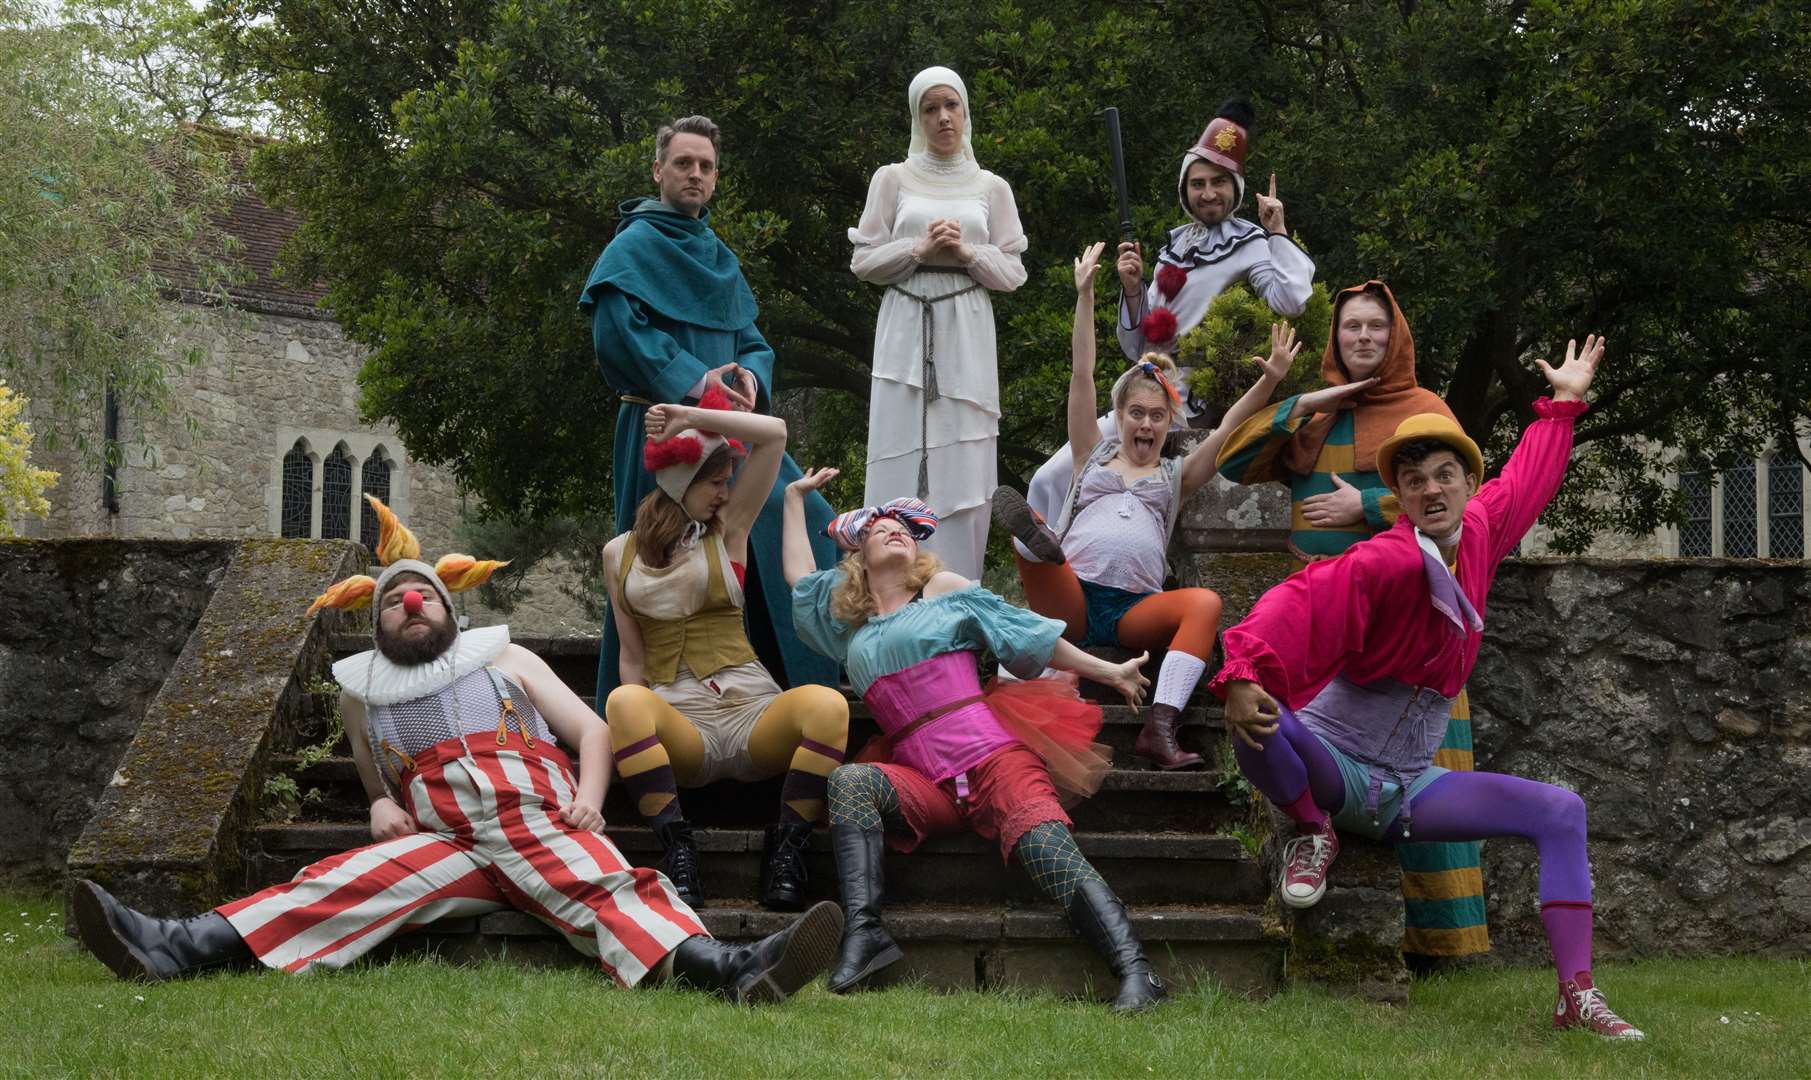 The cast of Measure for Measure and Blithe Spirit by the Changeling Theatre get ready to tour